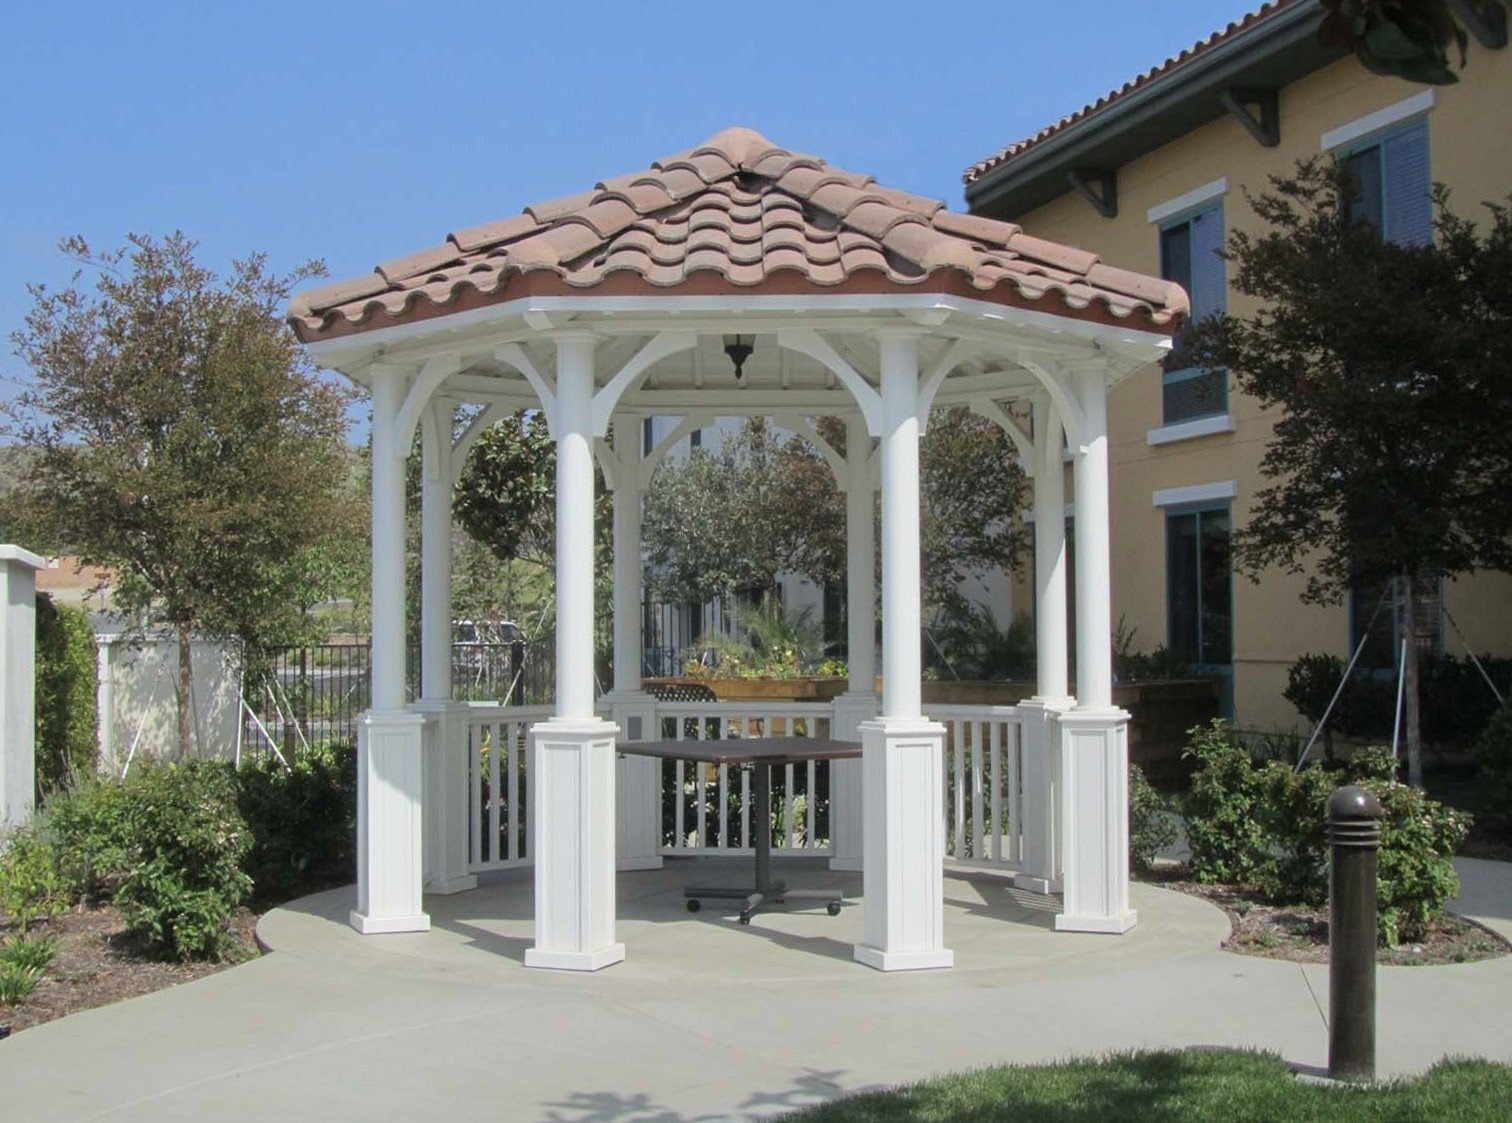 another example of a smaller octagonal gazebo in different style